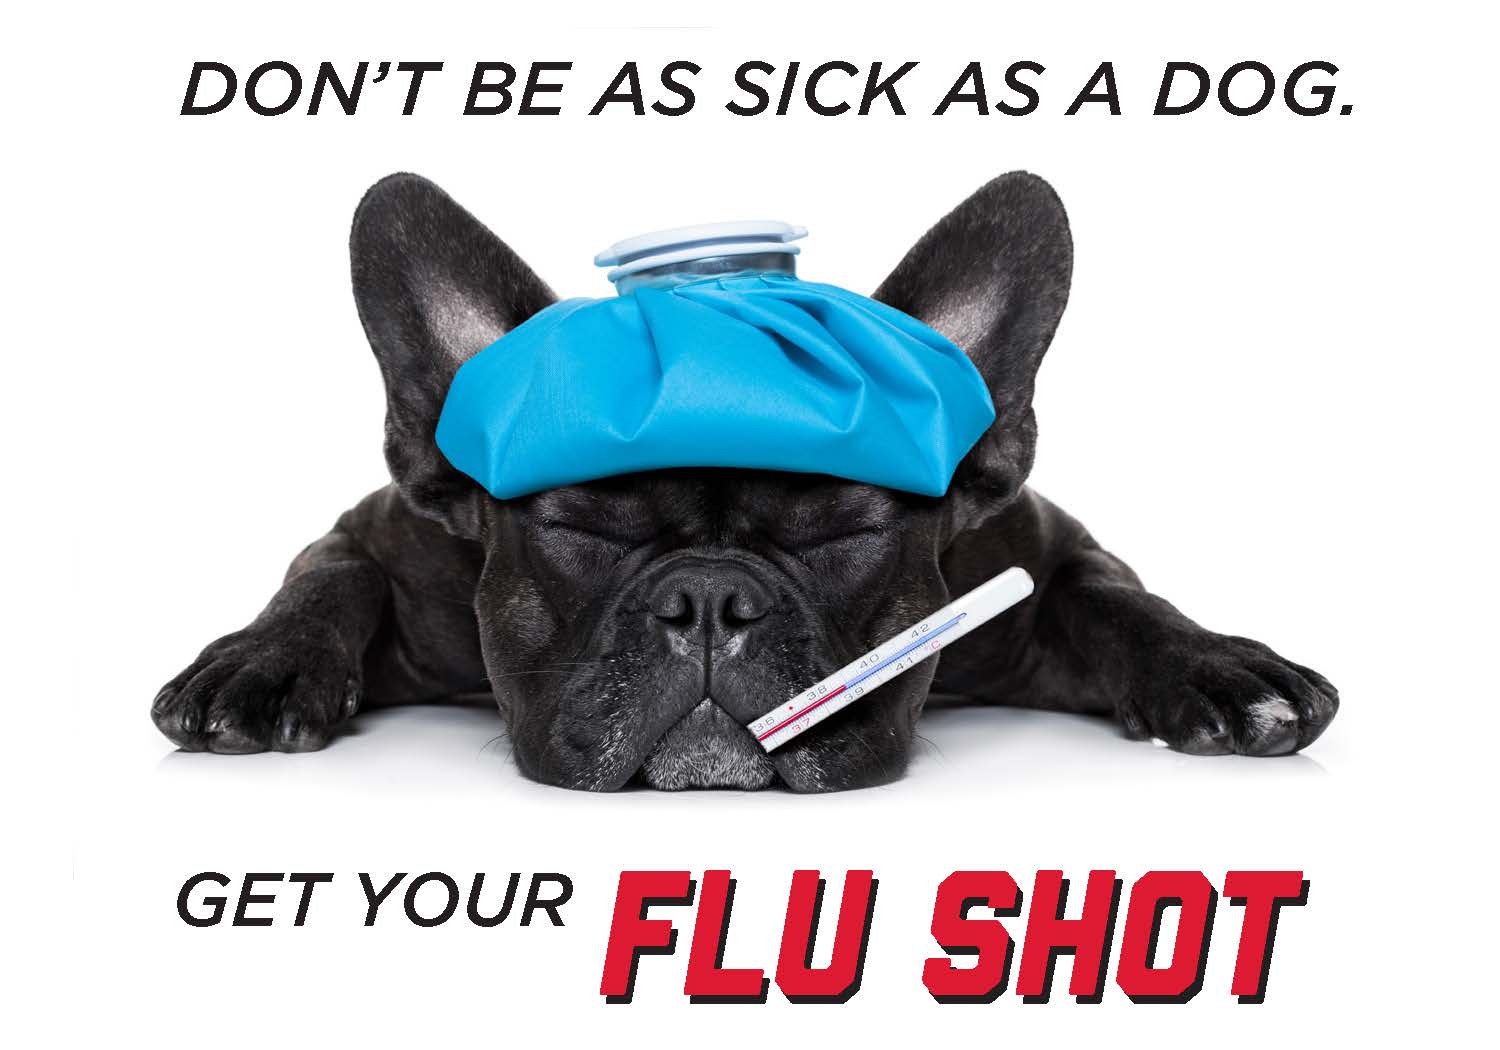 Free flu shots available at University Health Center Announce